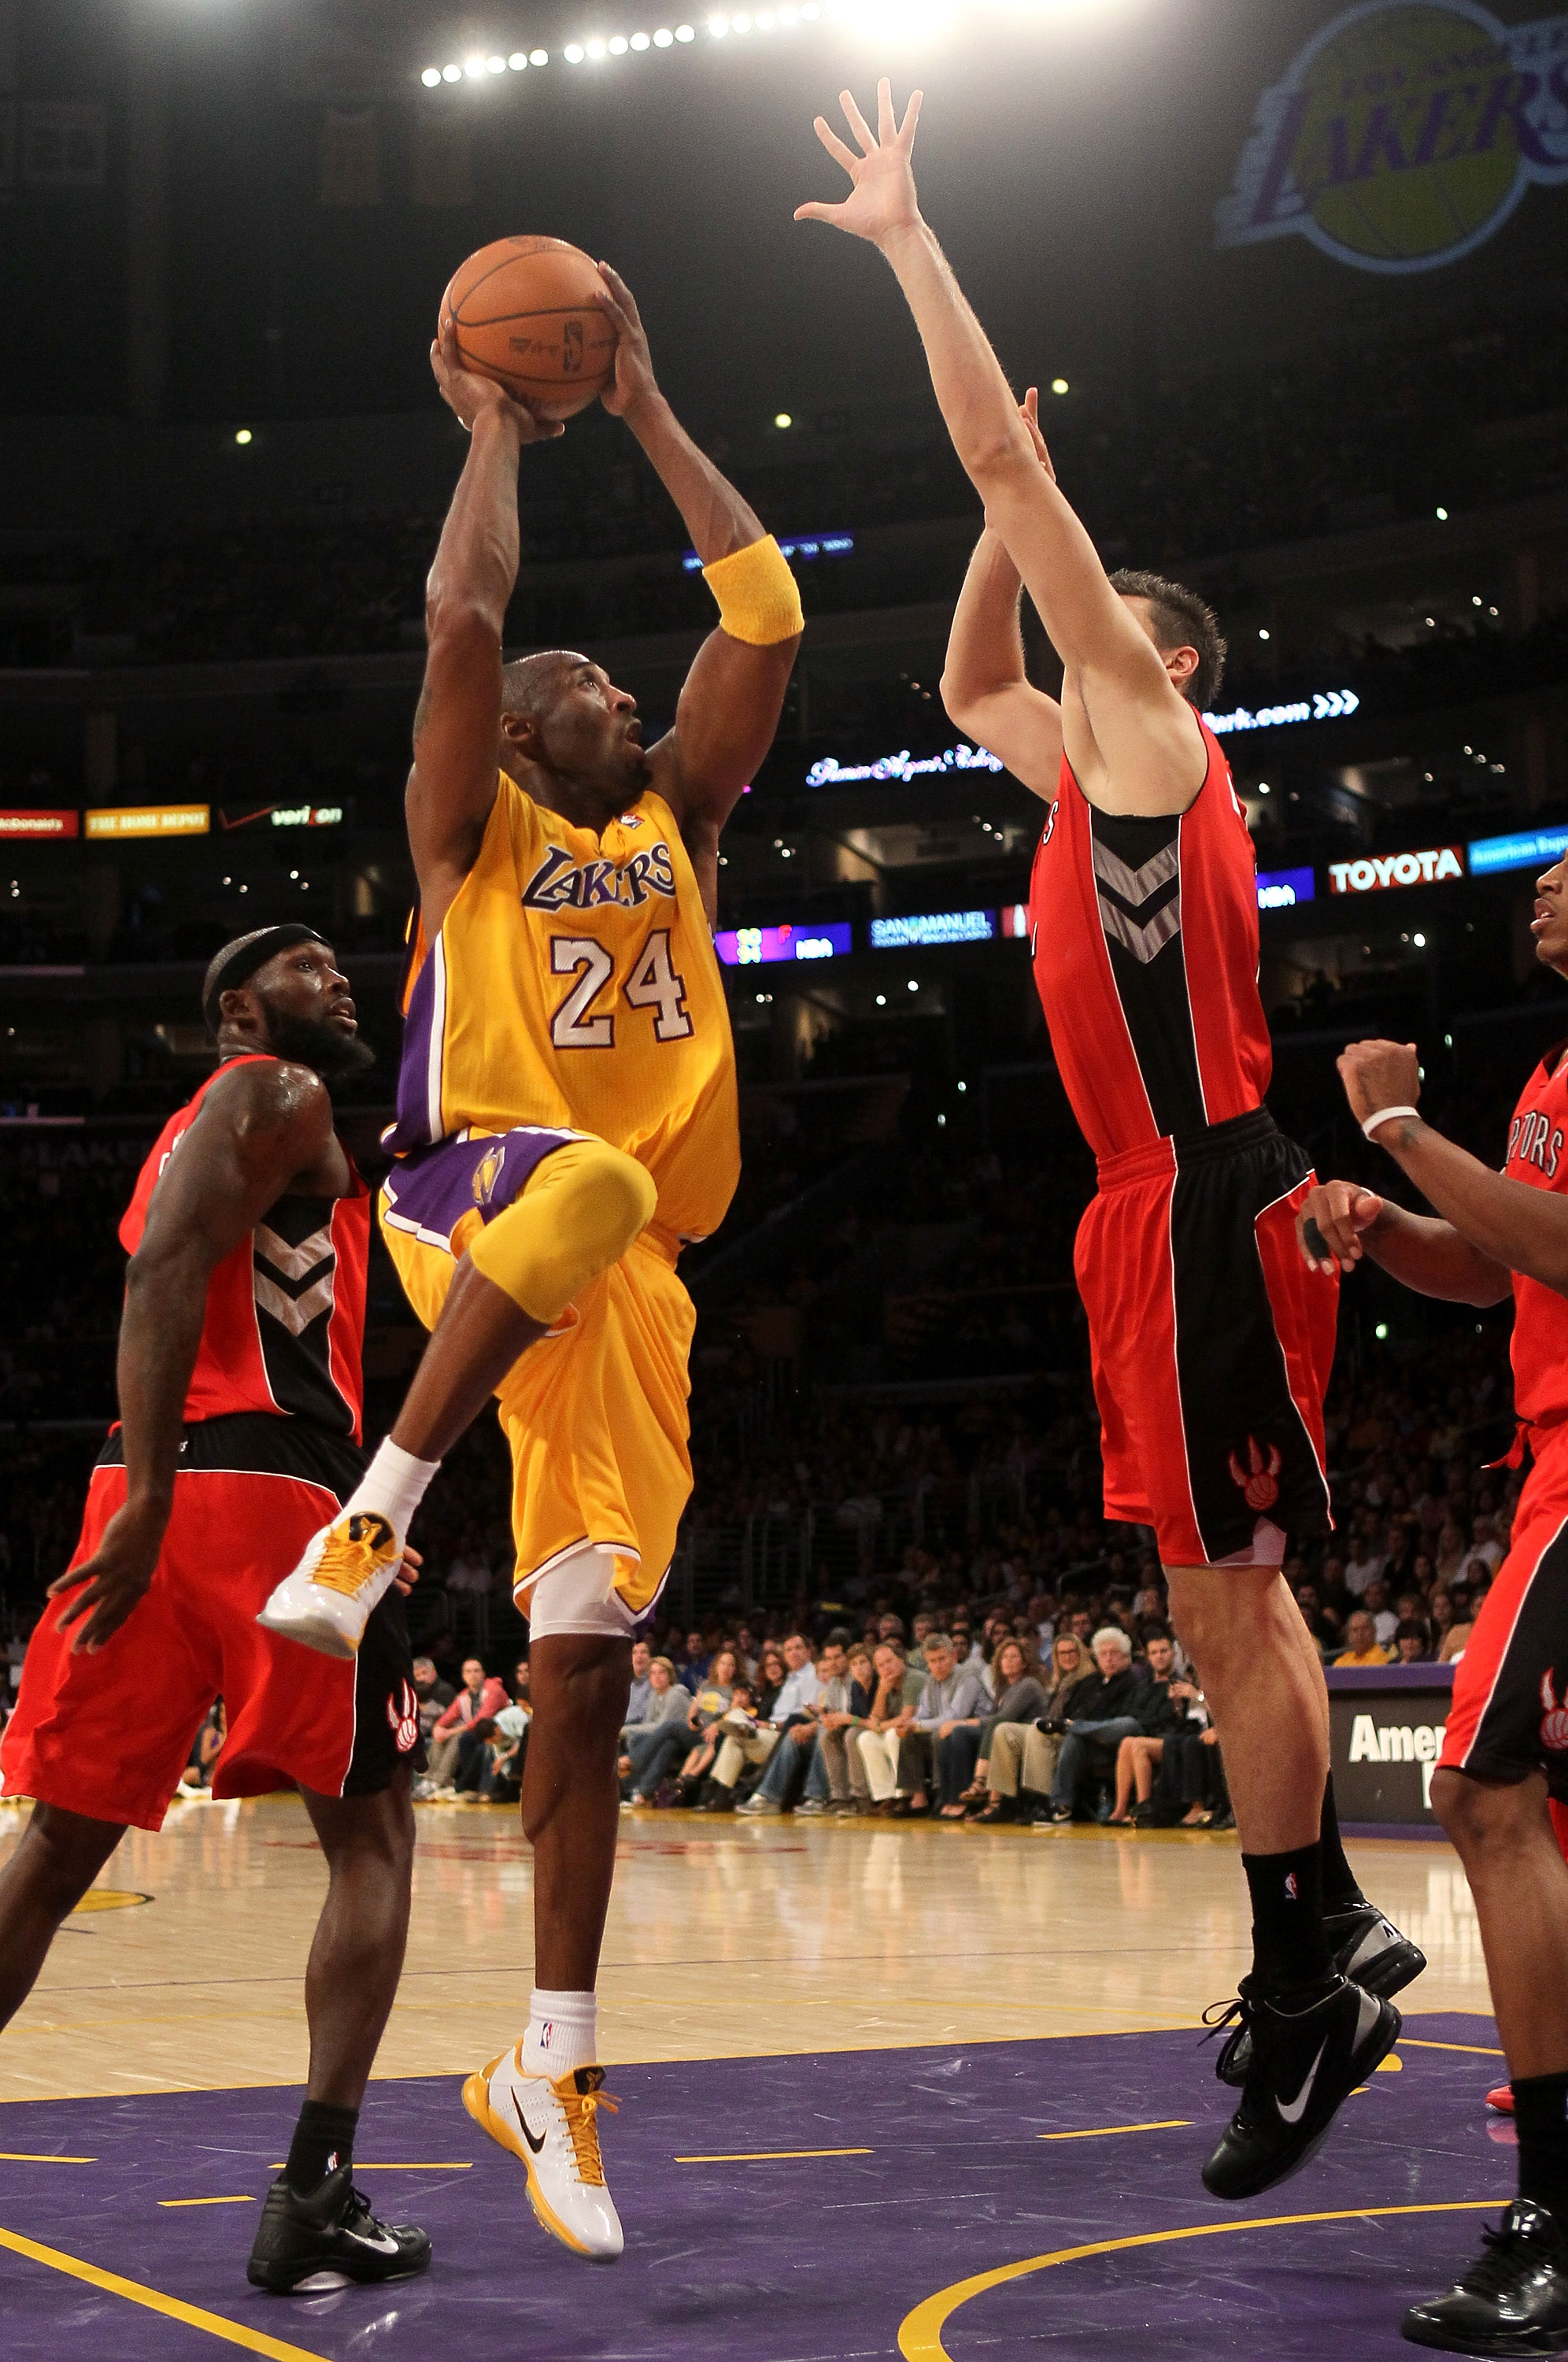 LOS ANGELES - NOVEMBER 5:  Kobe Bryant #24 of the Los Angeles Lakers goes up for a shot against Andrea Bargnani #7 of the Toronto Raptors at Staples Center on November 5, 2010 in Los Angeles, California.  The Lakers won 108-102.   NOTE TO USER: User expre